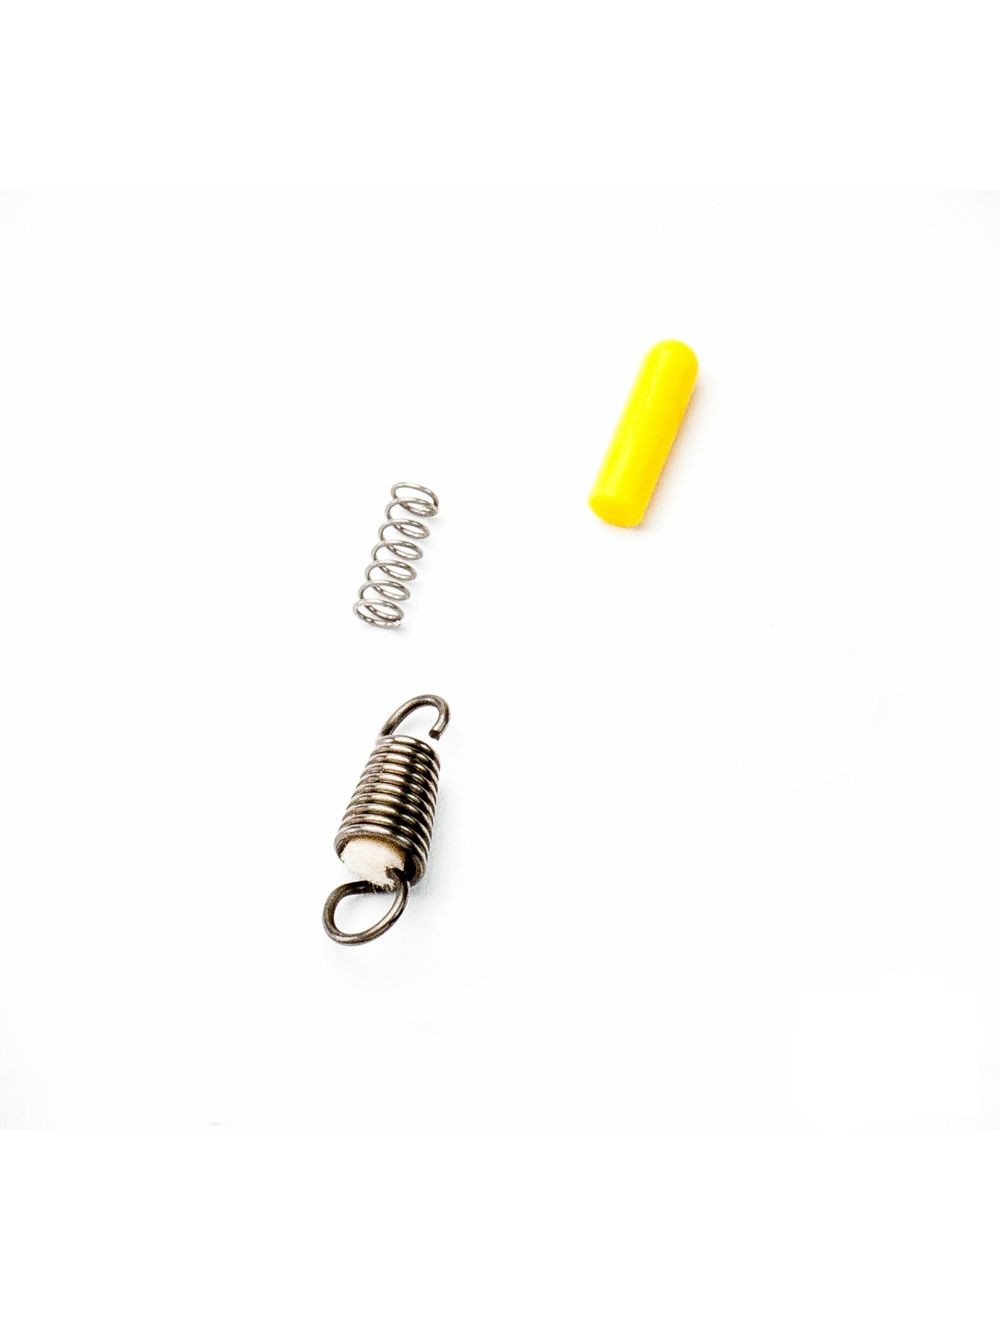 Duty/Carry Spring Kit for M&P